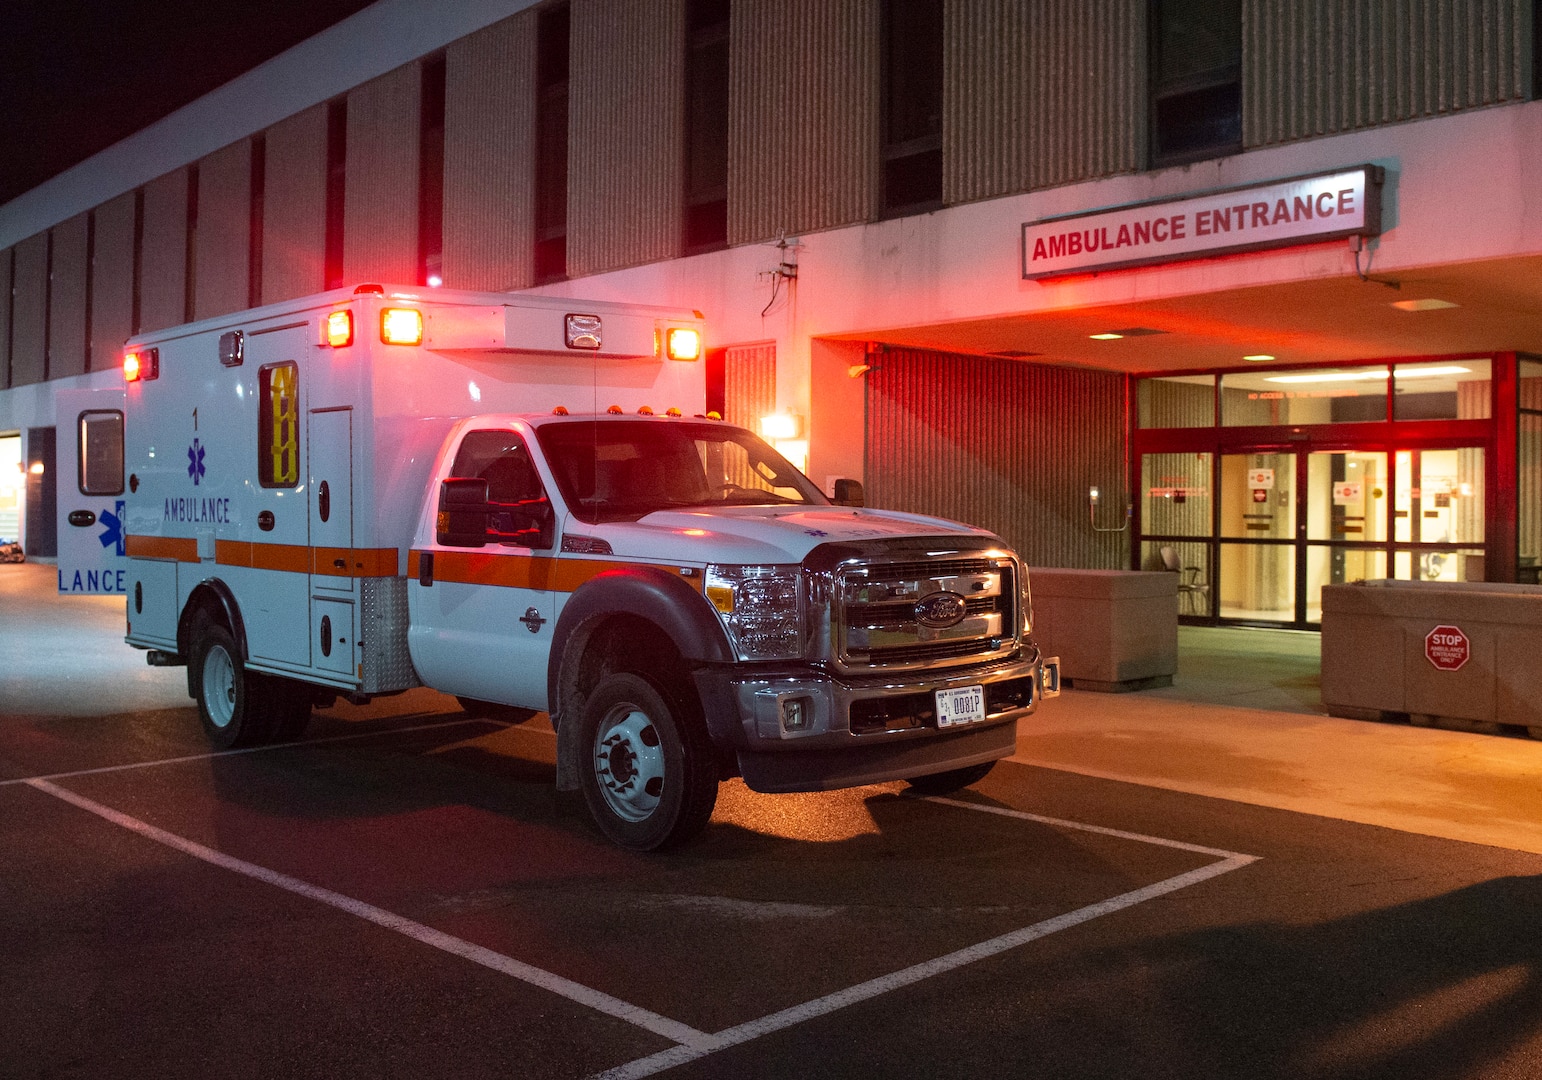 An ambulance sits with its lights on outside the Wright-Patterson Air Force Base, Ohio Medical Center, April, 28, 2021. The medical center is open 24 hours a day with medical personnel standing by to treat anyone that comes through their door. (U.S. Air Force photo by Wesley Farnsworth)